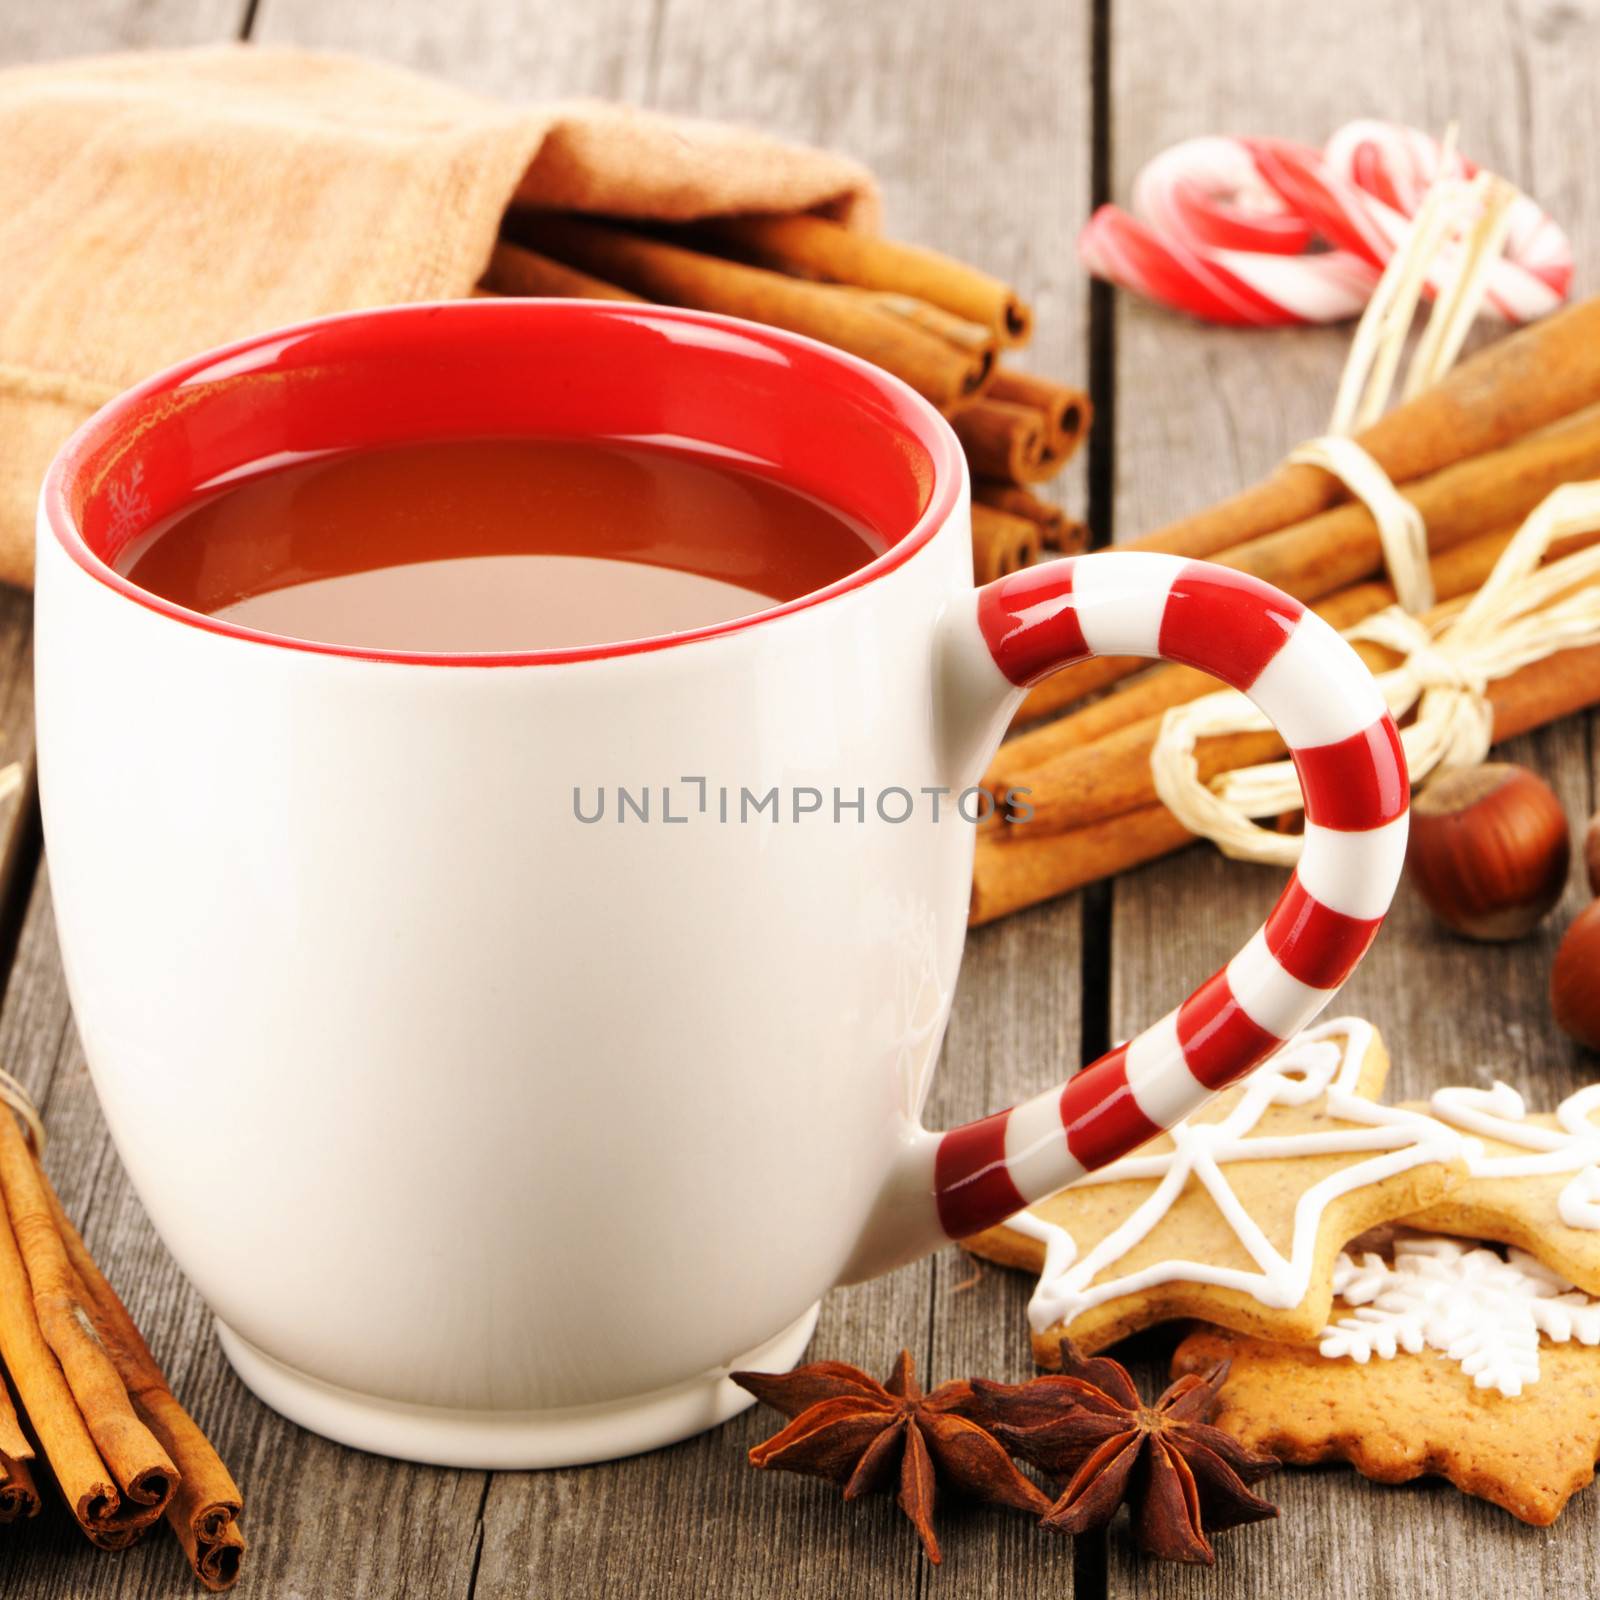 Mug of hot chocolate on wooden table